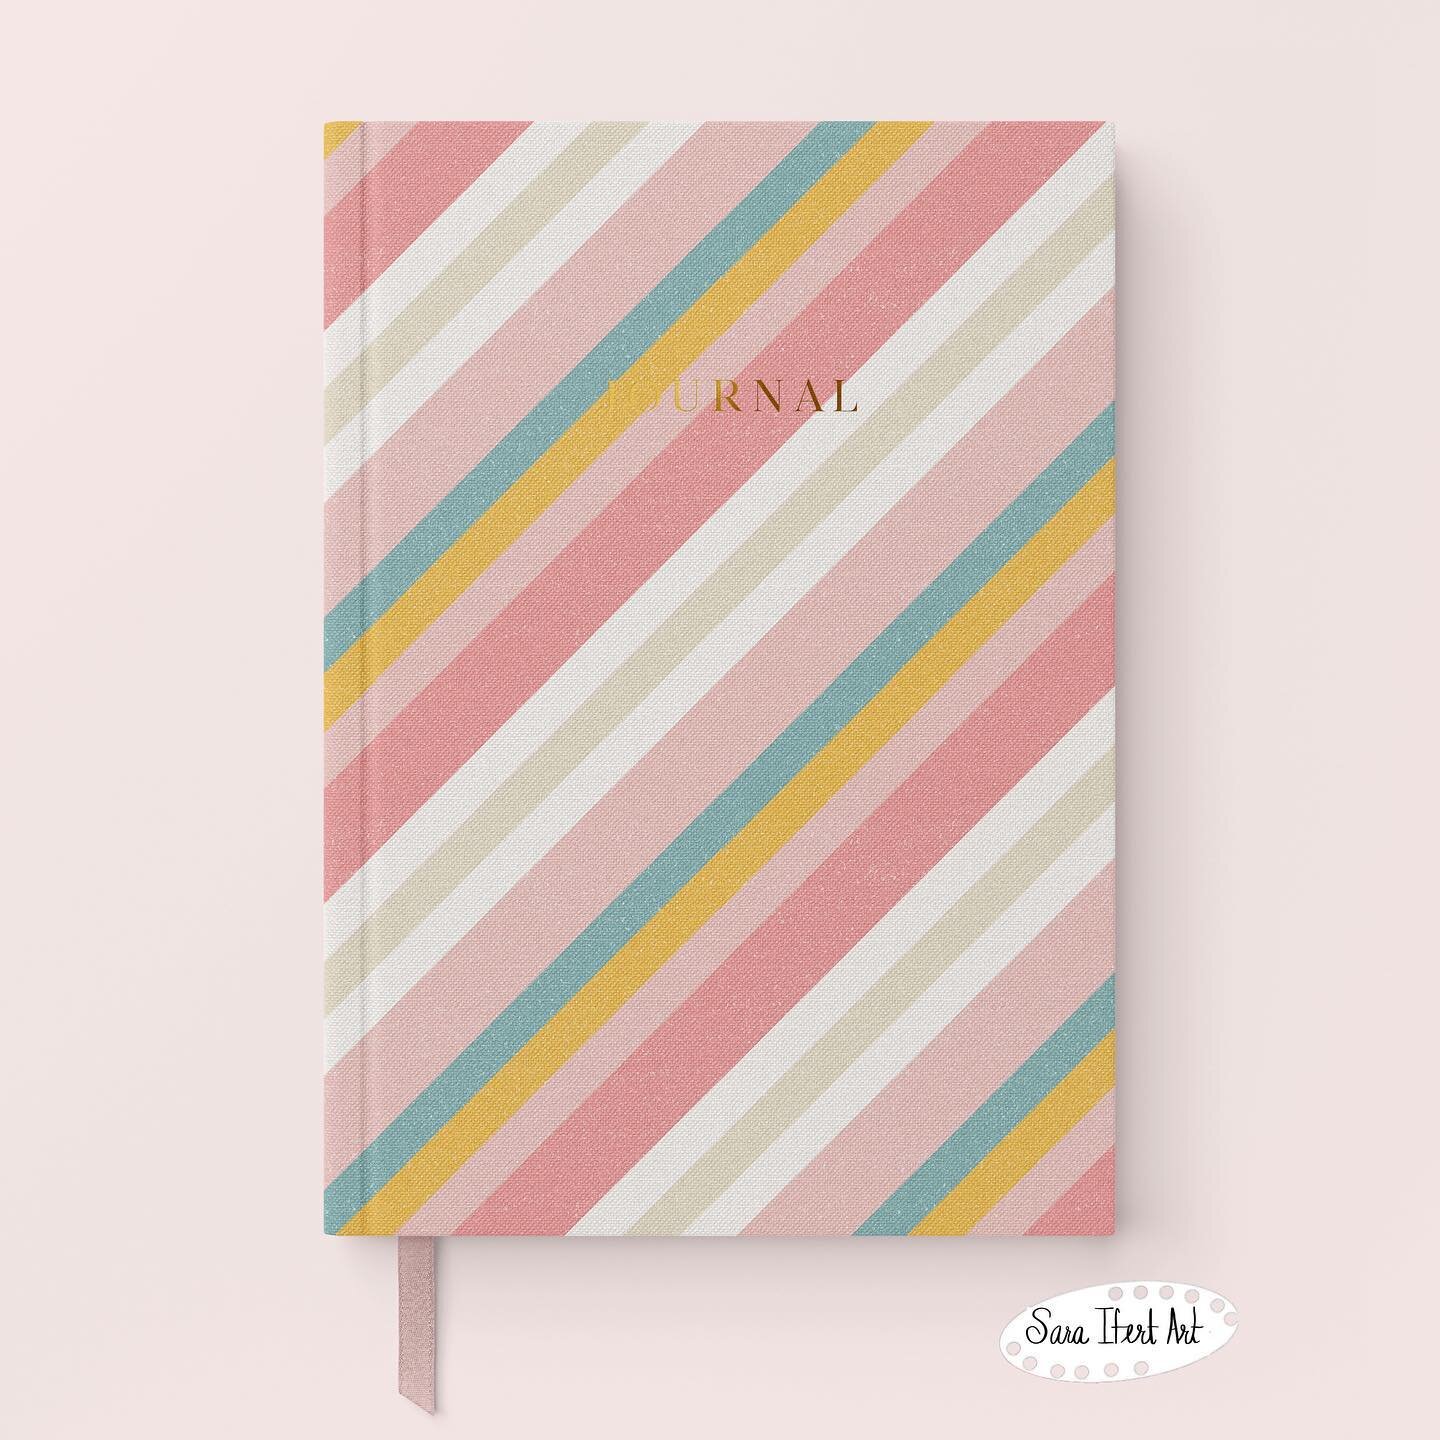 Working on some new designs with inspiration from #patternswithmaja. Which do you like better, on this journal? Diagonal stripes or horizontal?